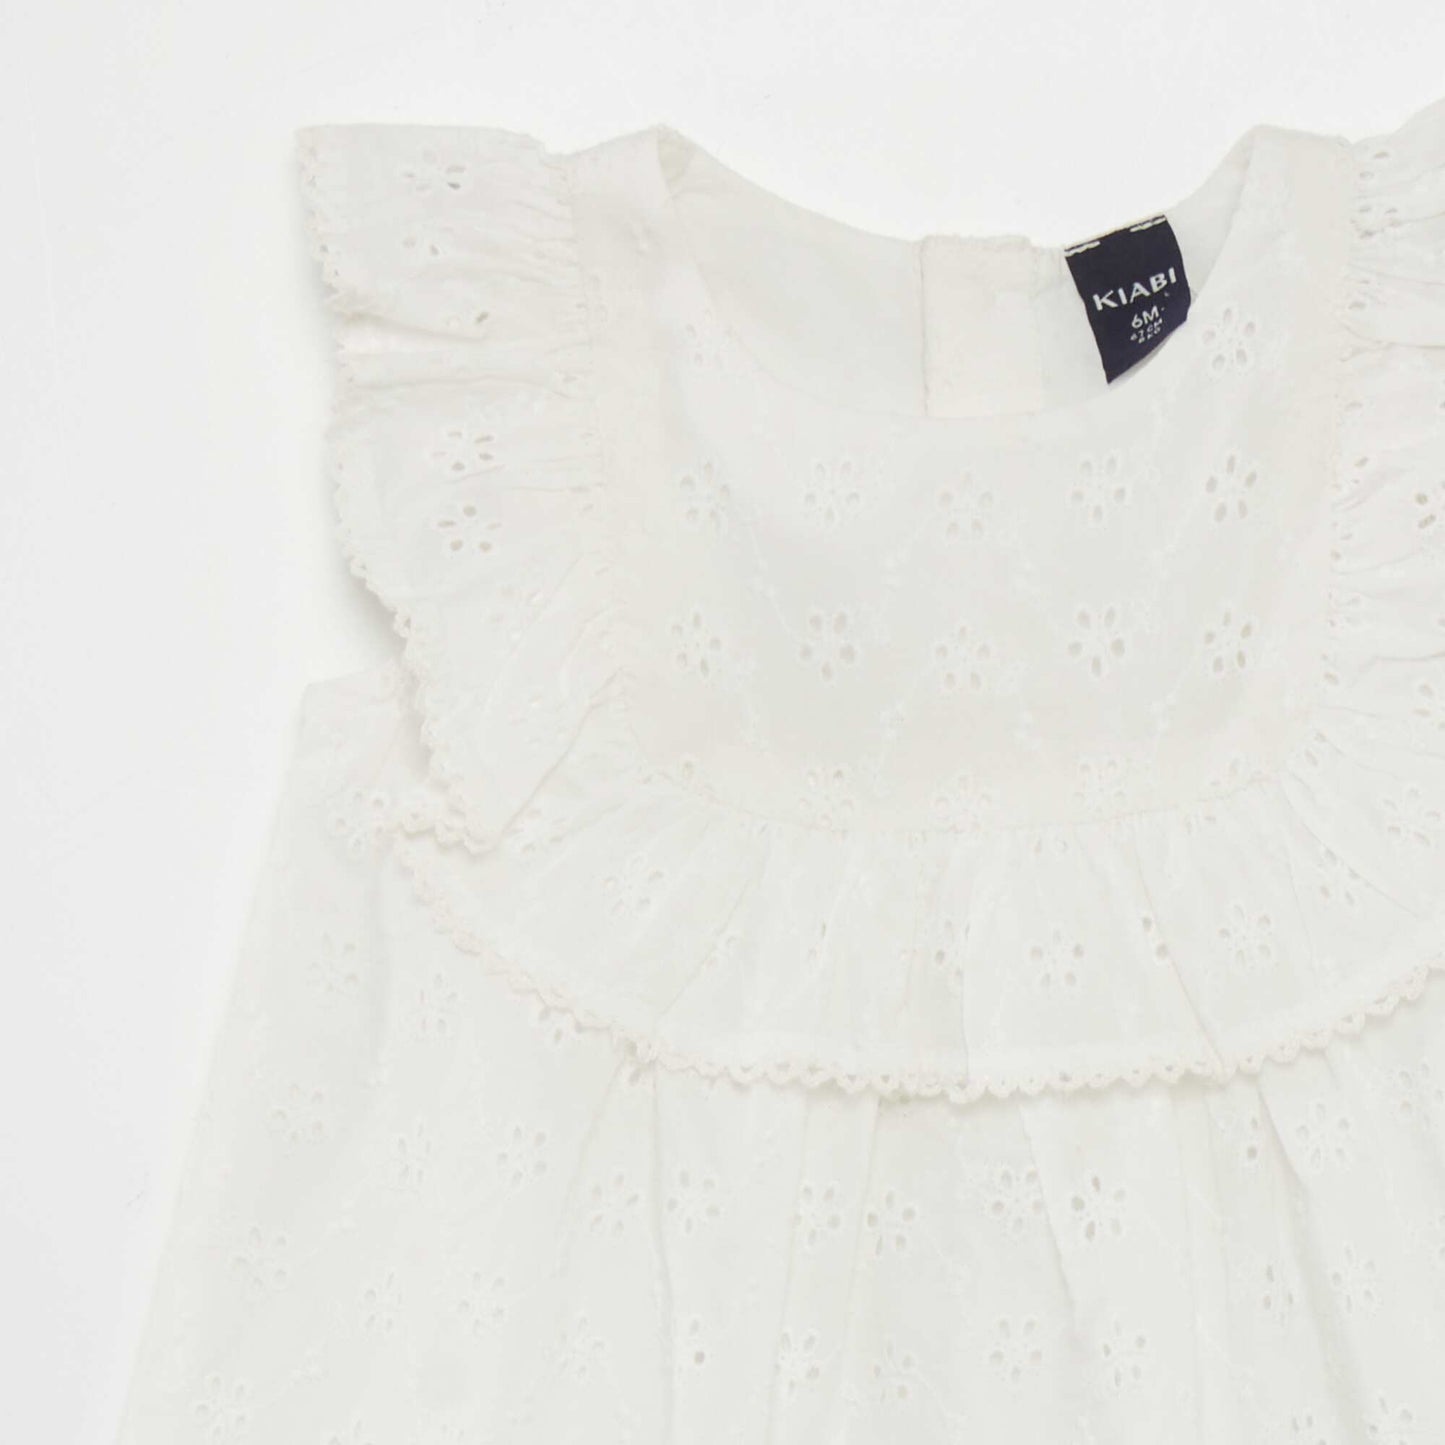 Dress with broderie anglaise and ruffle WHITE